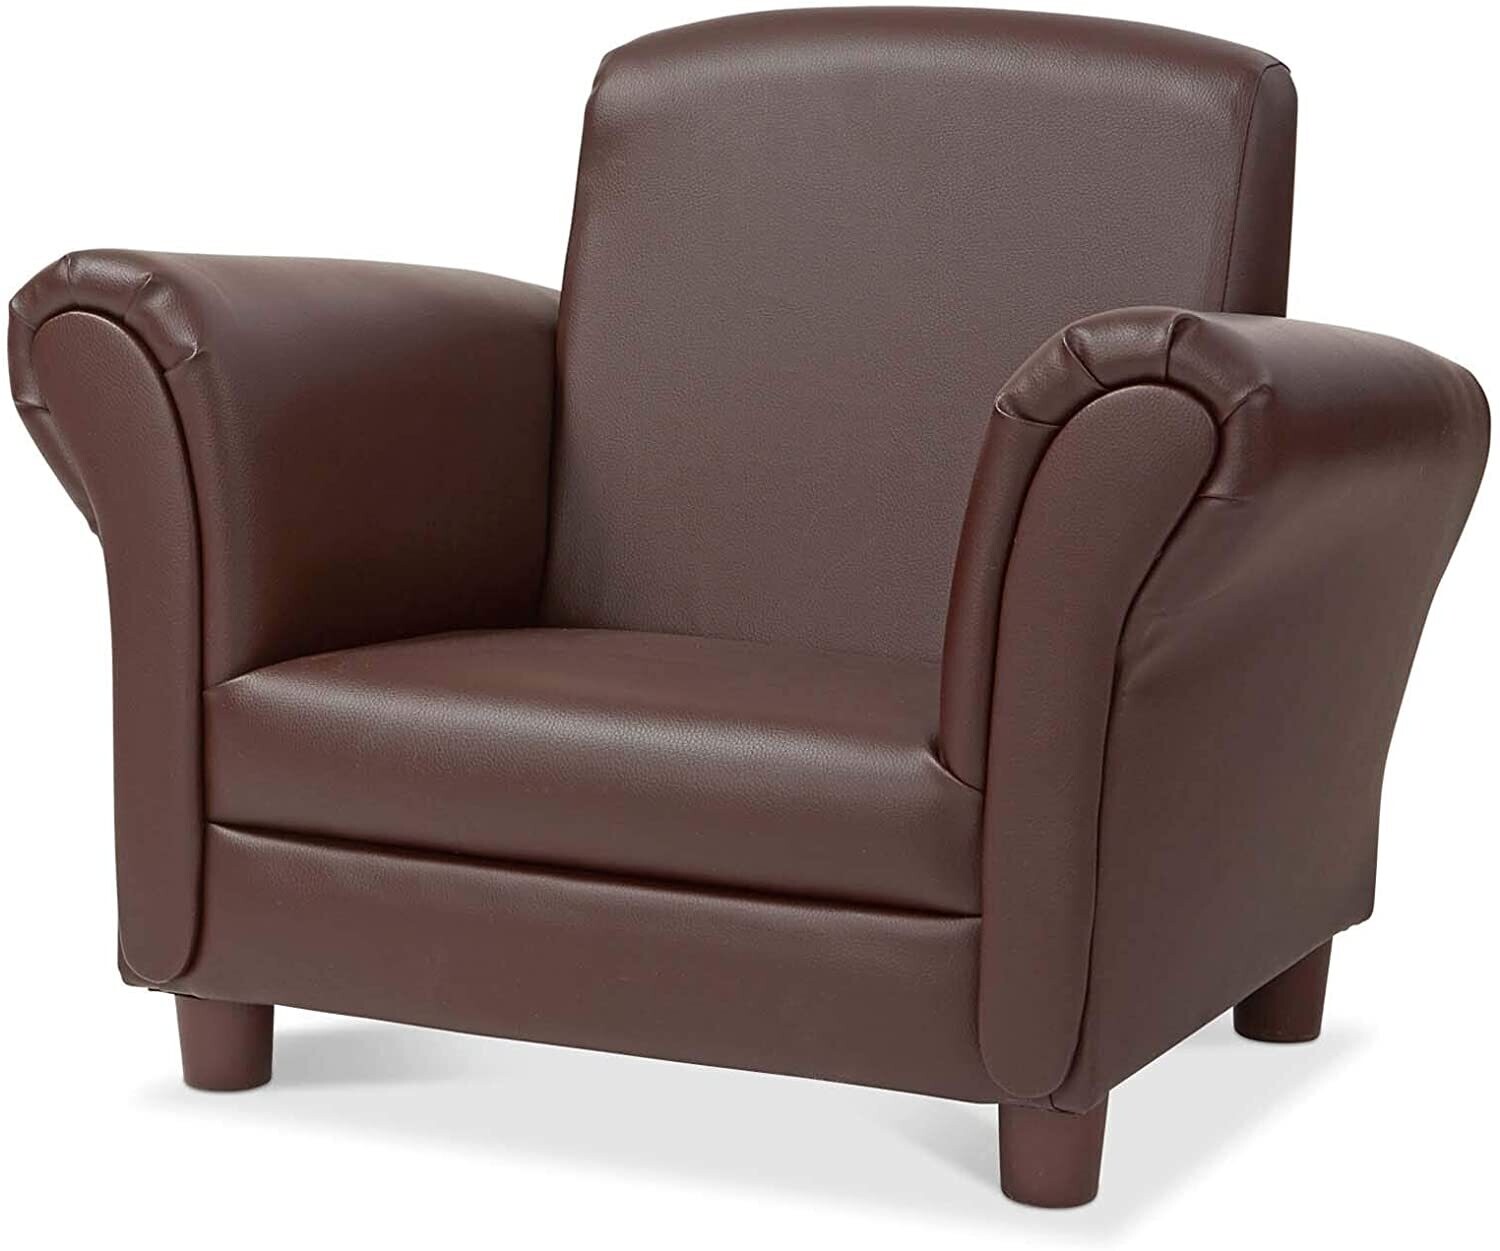 MD Child's Armchair Coffee Faux Leather